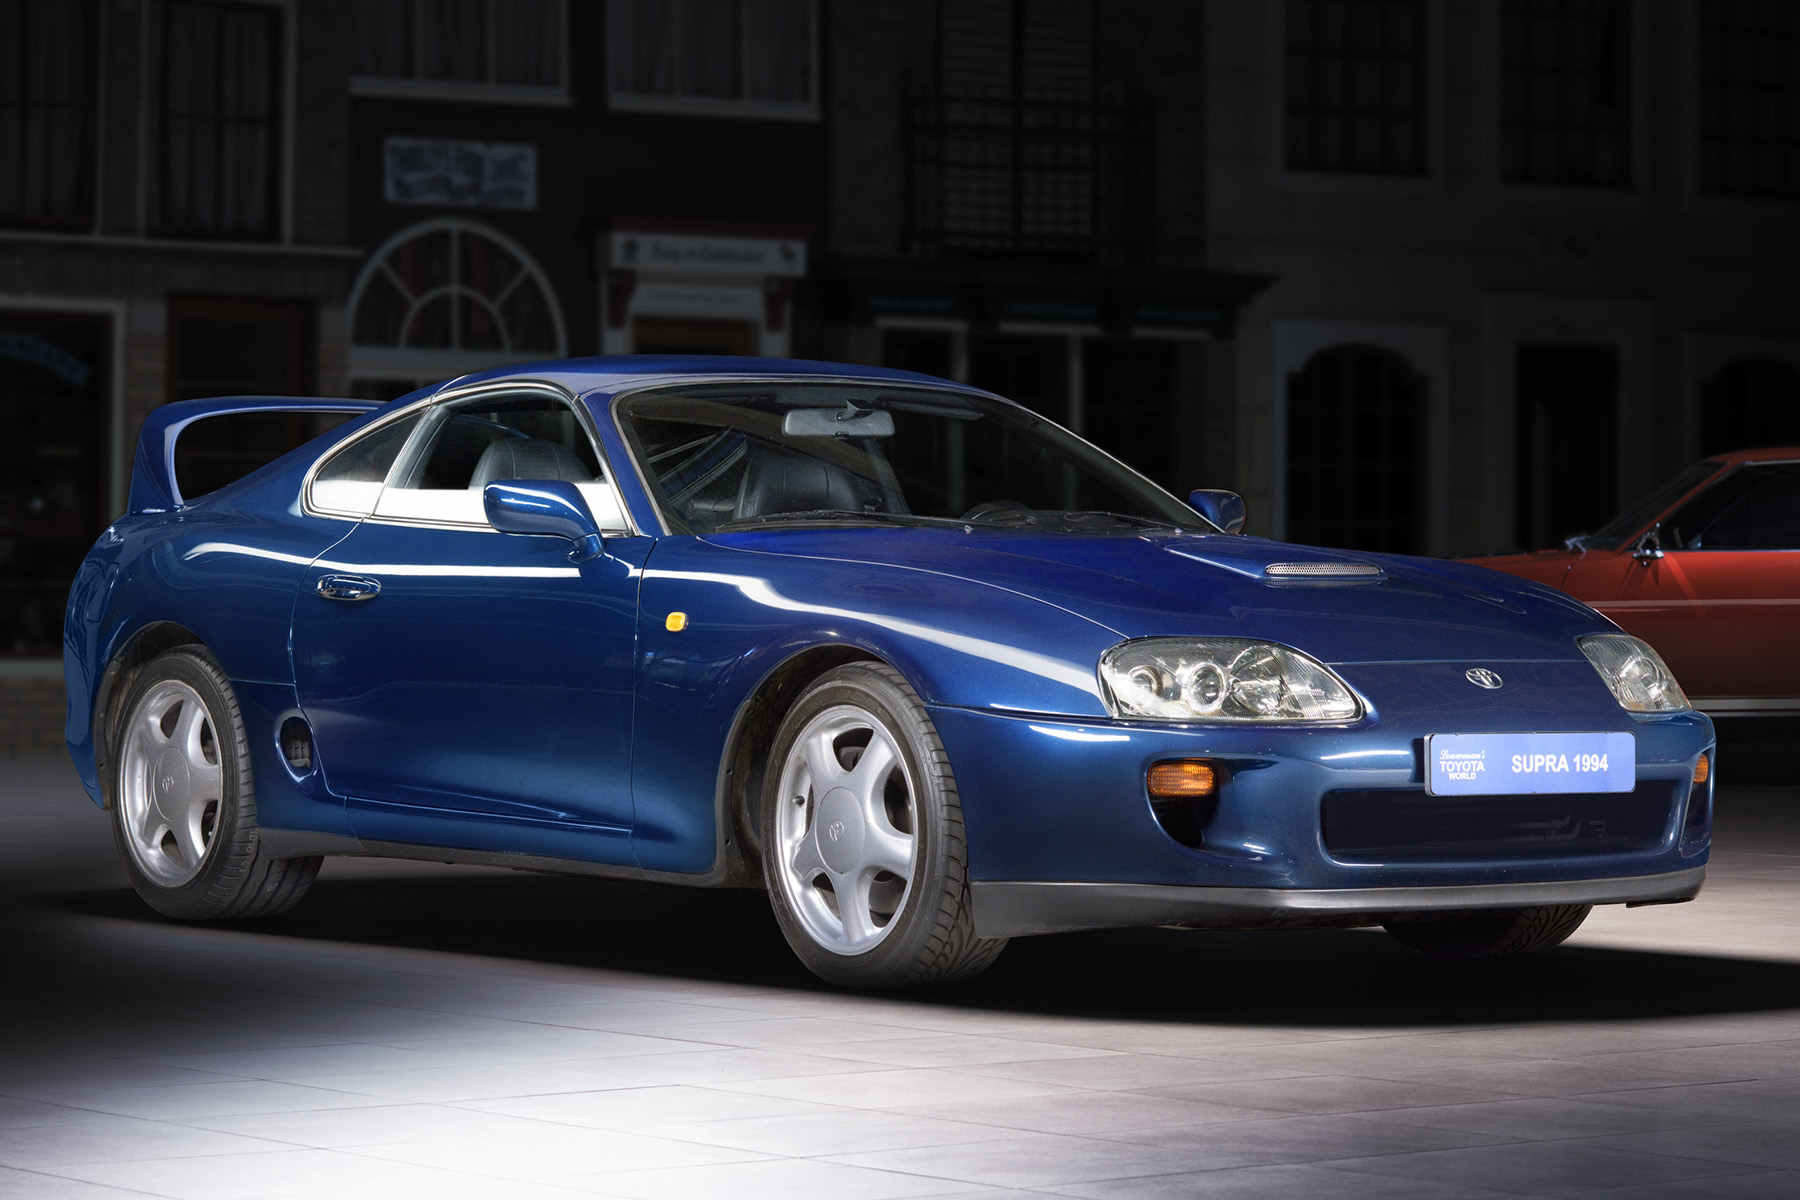 Supra heroes: the story of the Toyota Supra